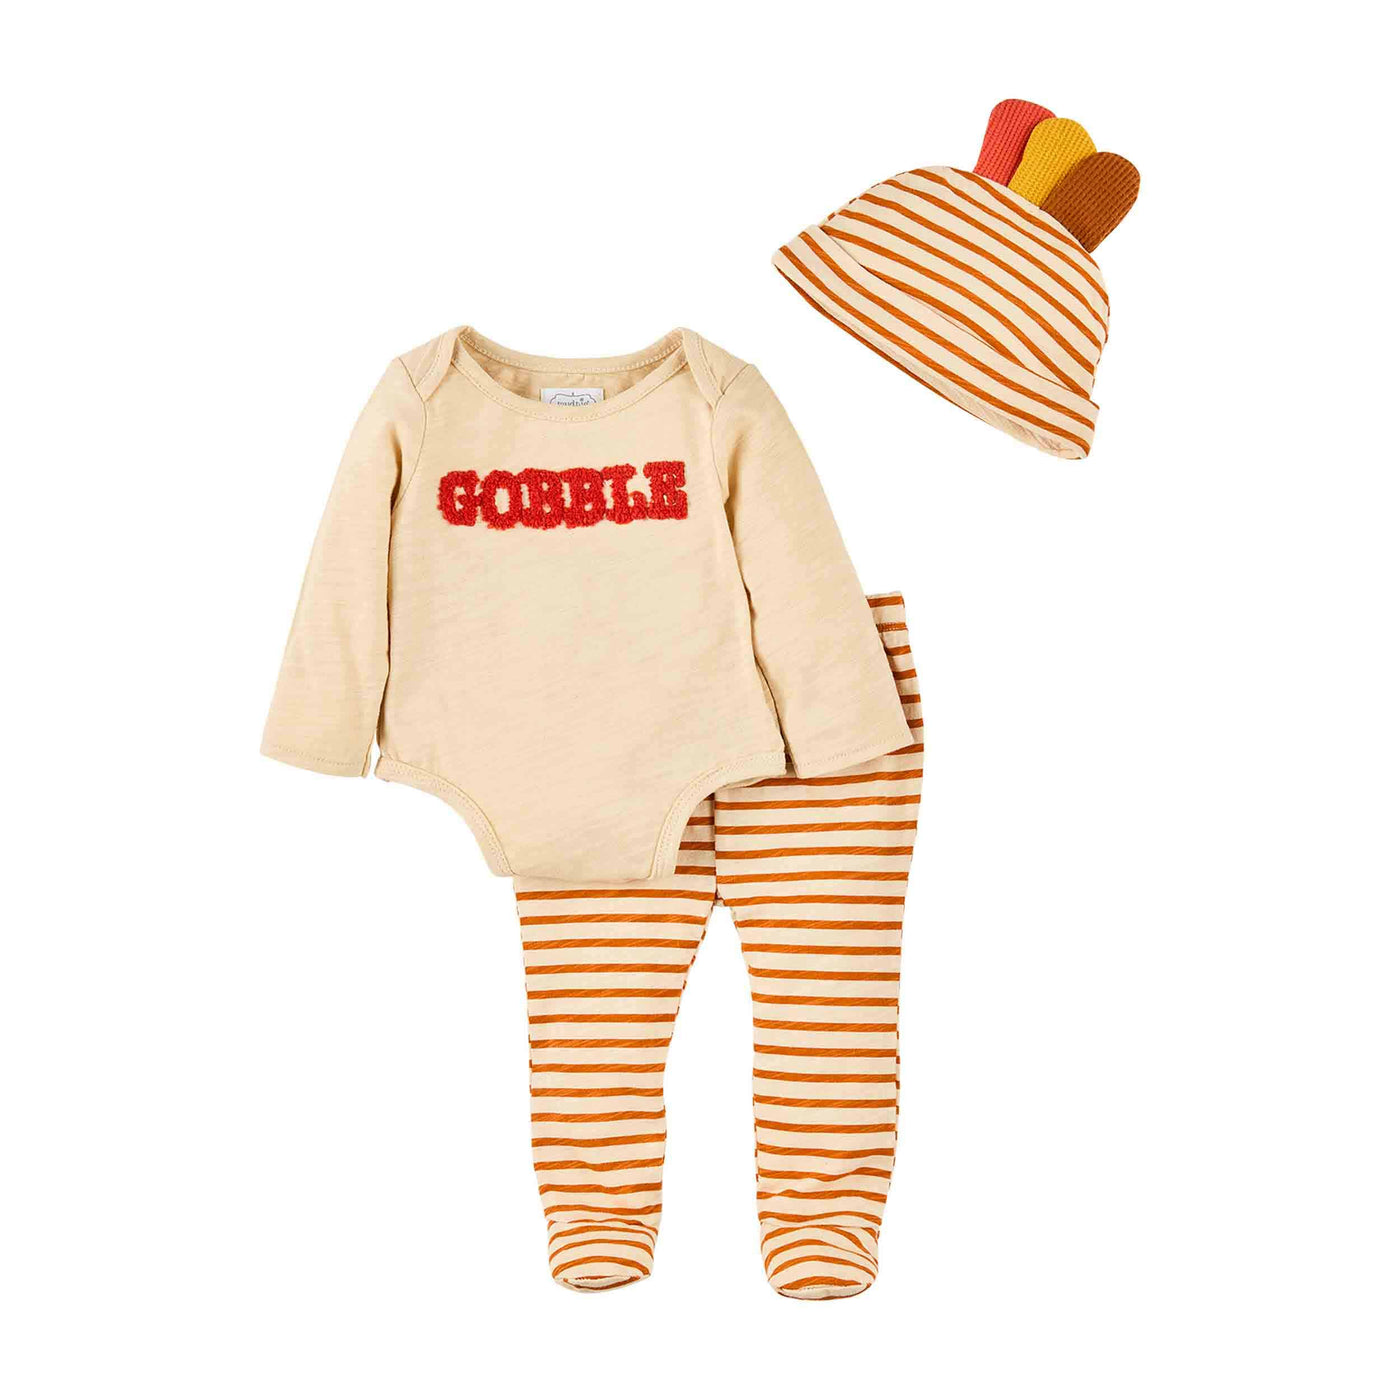 Gobble Baby Outfit